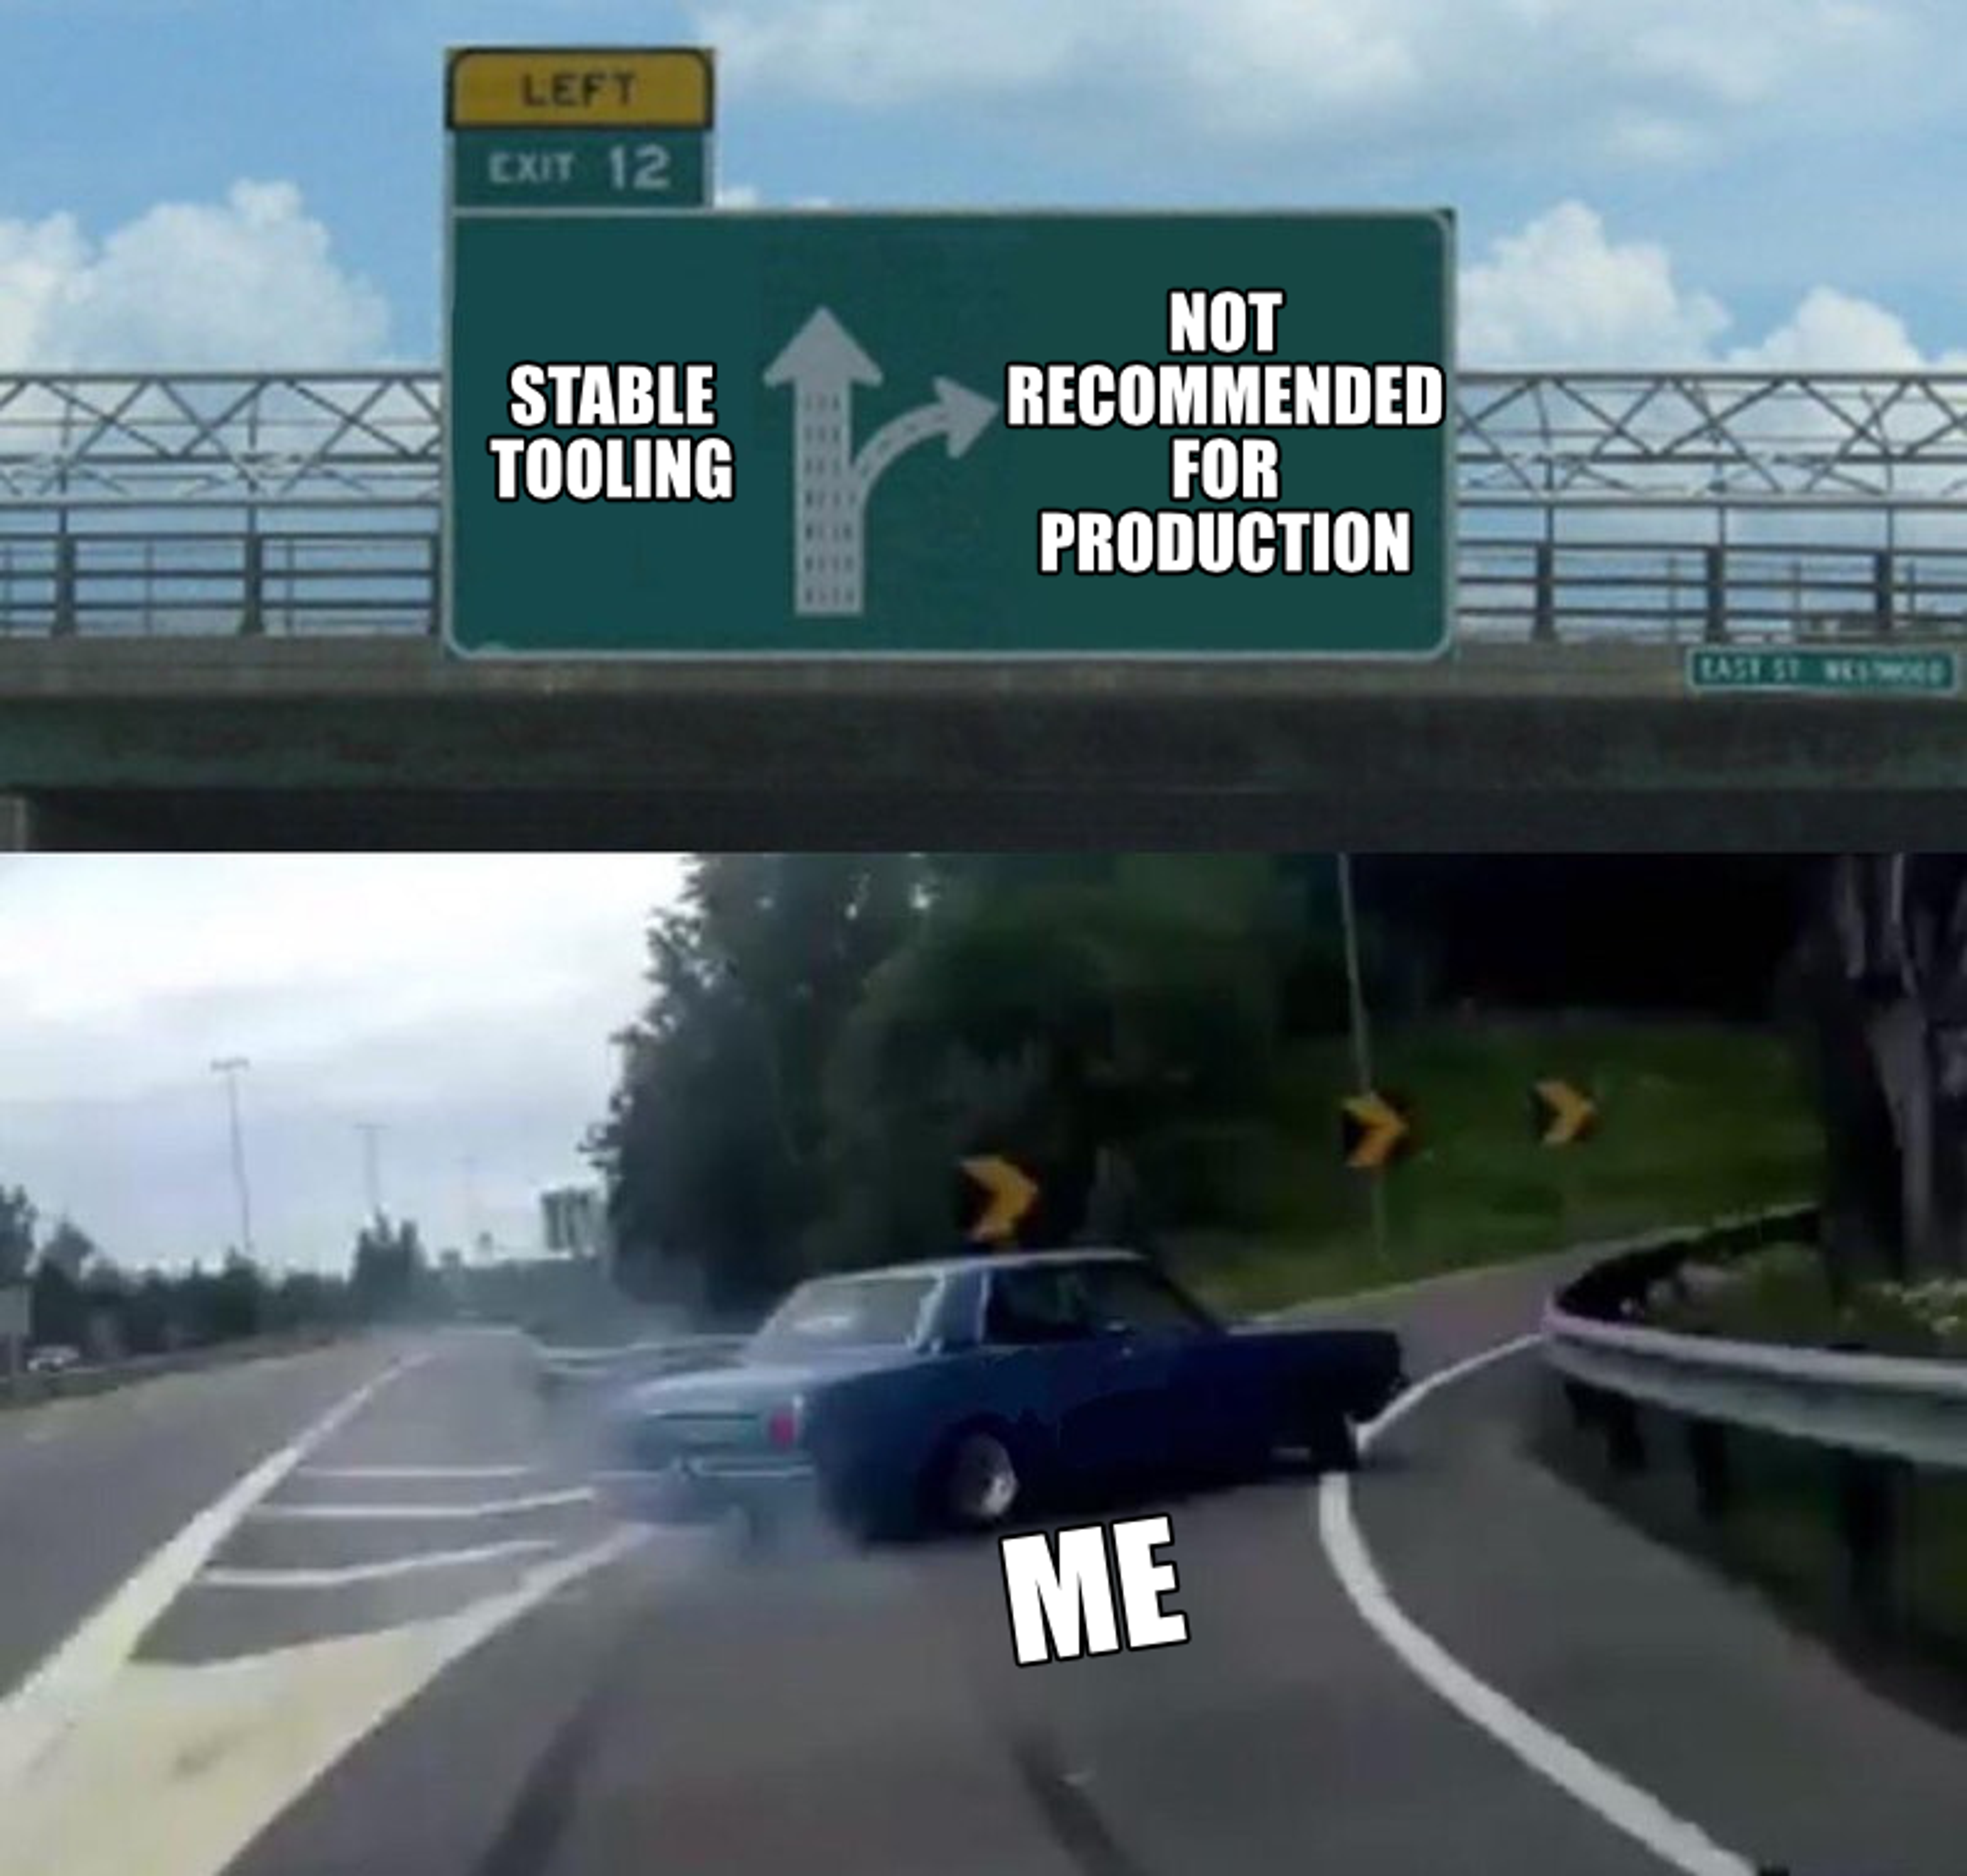 A meme depicting the way we, as developers, tend to choose tooling not recommended for production.